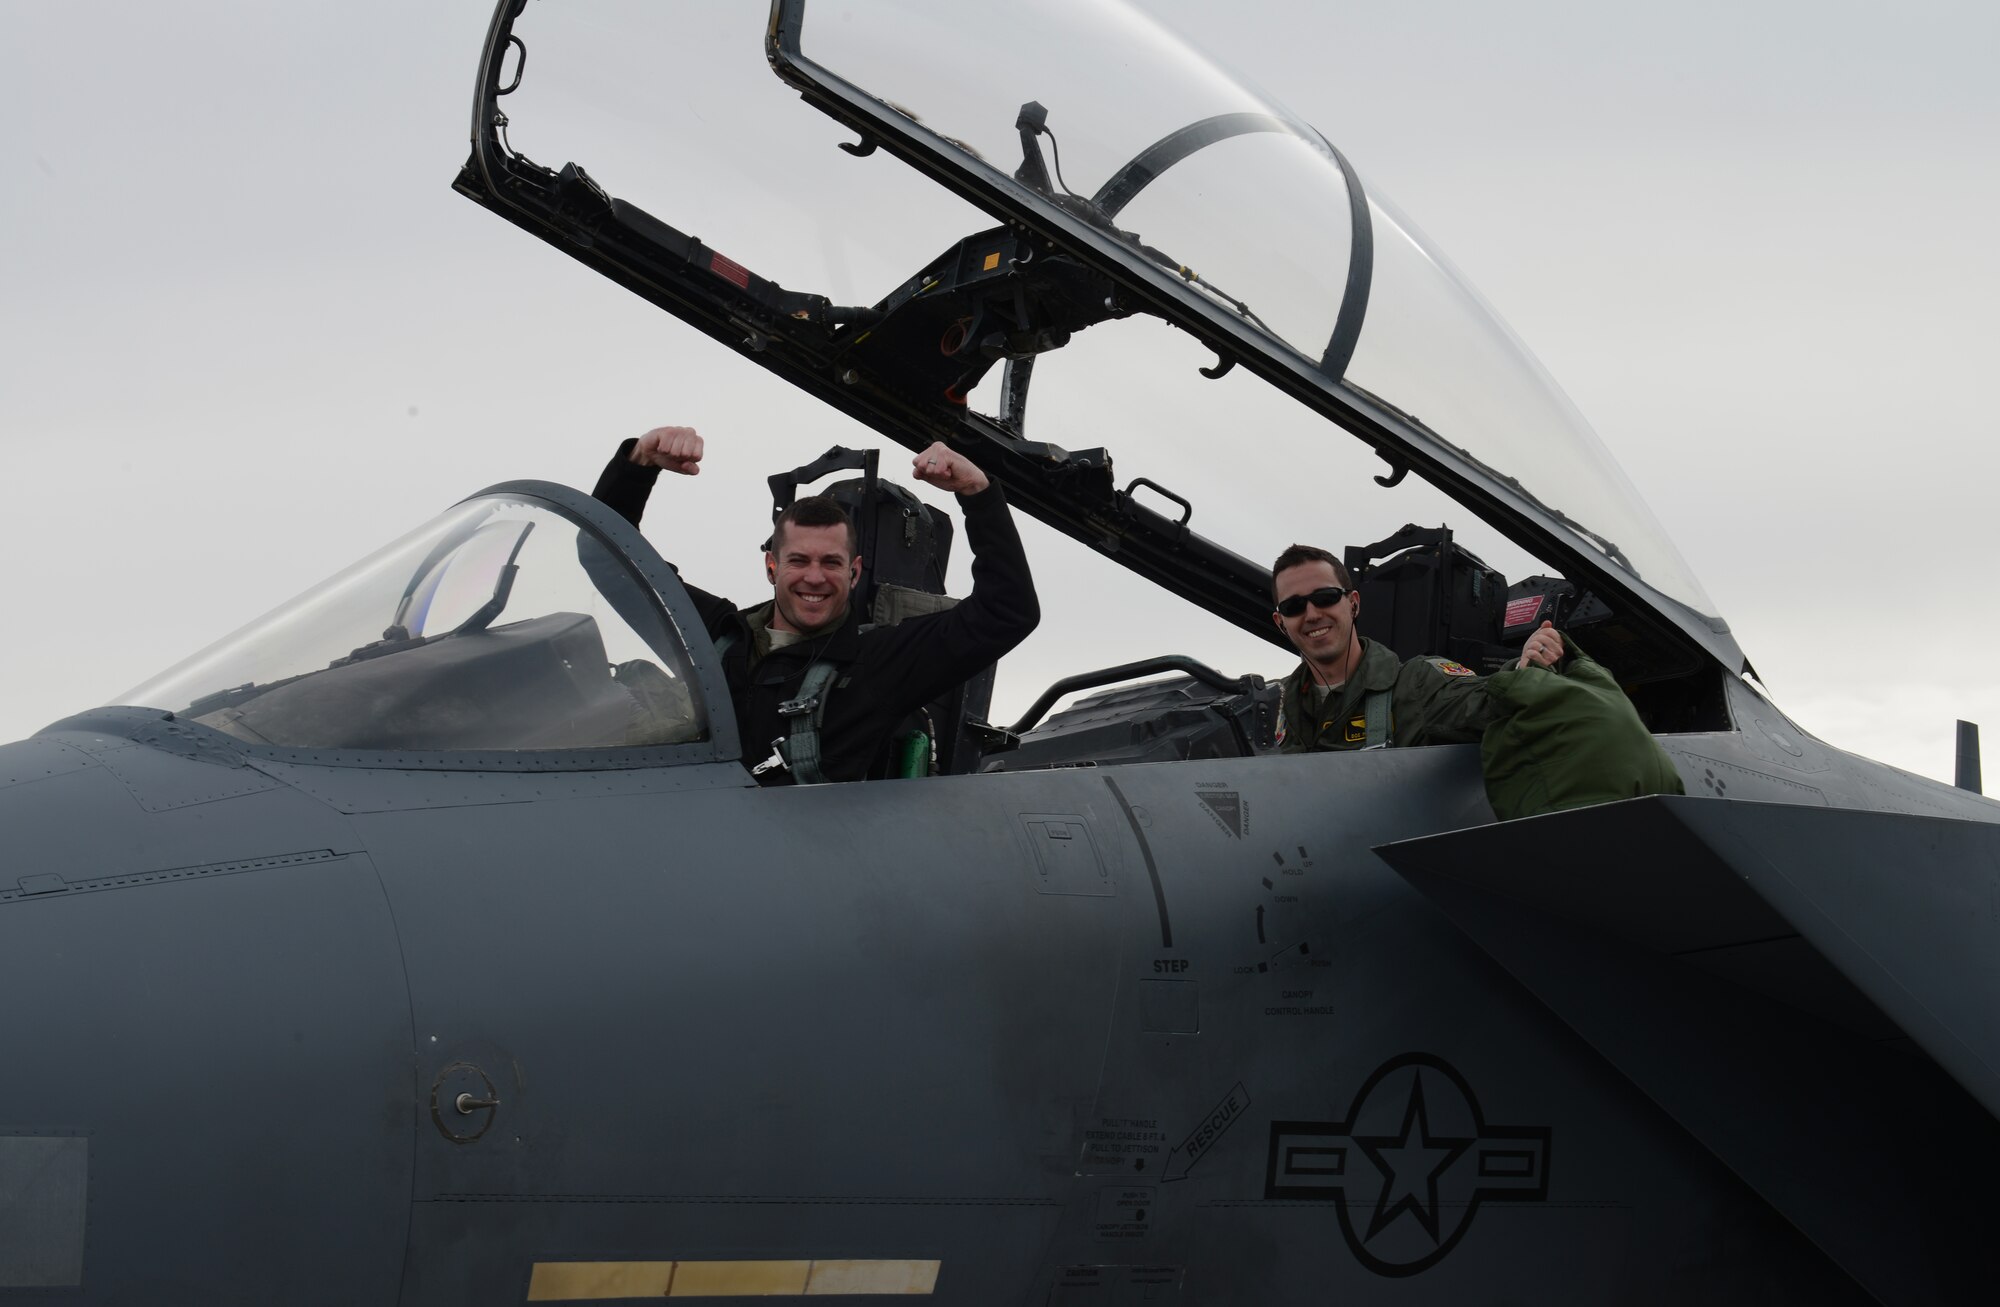 Capt. Benjamin Hoffman, 391st Fighter Squadron training officer, and 1st Lt. Matthew Martinez, 391st FS weapons system officer, cheer after landing their F-15E Strike Eagle Jan. 23, 2013, at Nellis Air Force Base, Nev. Members of the 366th Fighter Wing from Mountain Home Air Force Base, Idaho, waited more than three hours due to foggy conditions before being allowed to set out for Nellis AFB to participate in the combat exercise Red Flag 14-1. (U.S. Air Force photo by Senior Airman Benjamin Sutton/Released)